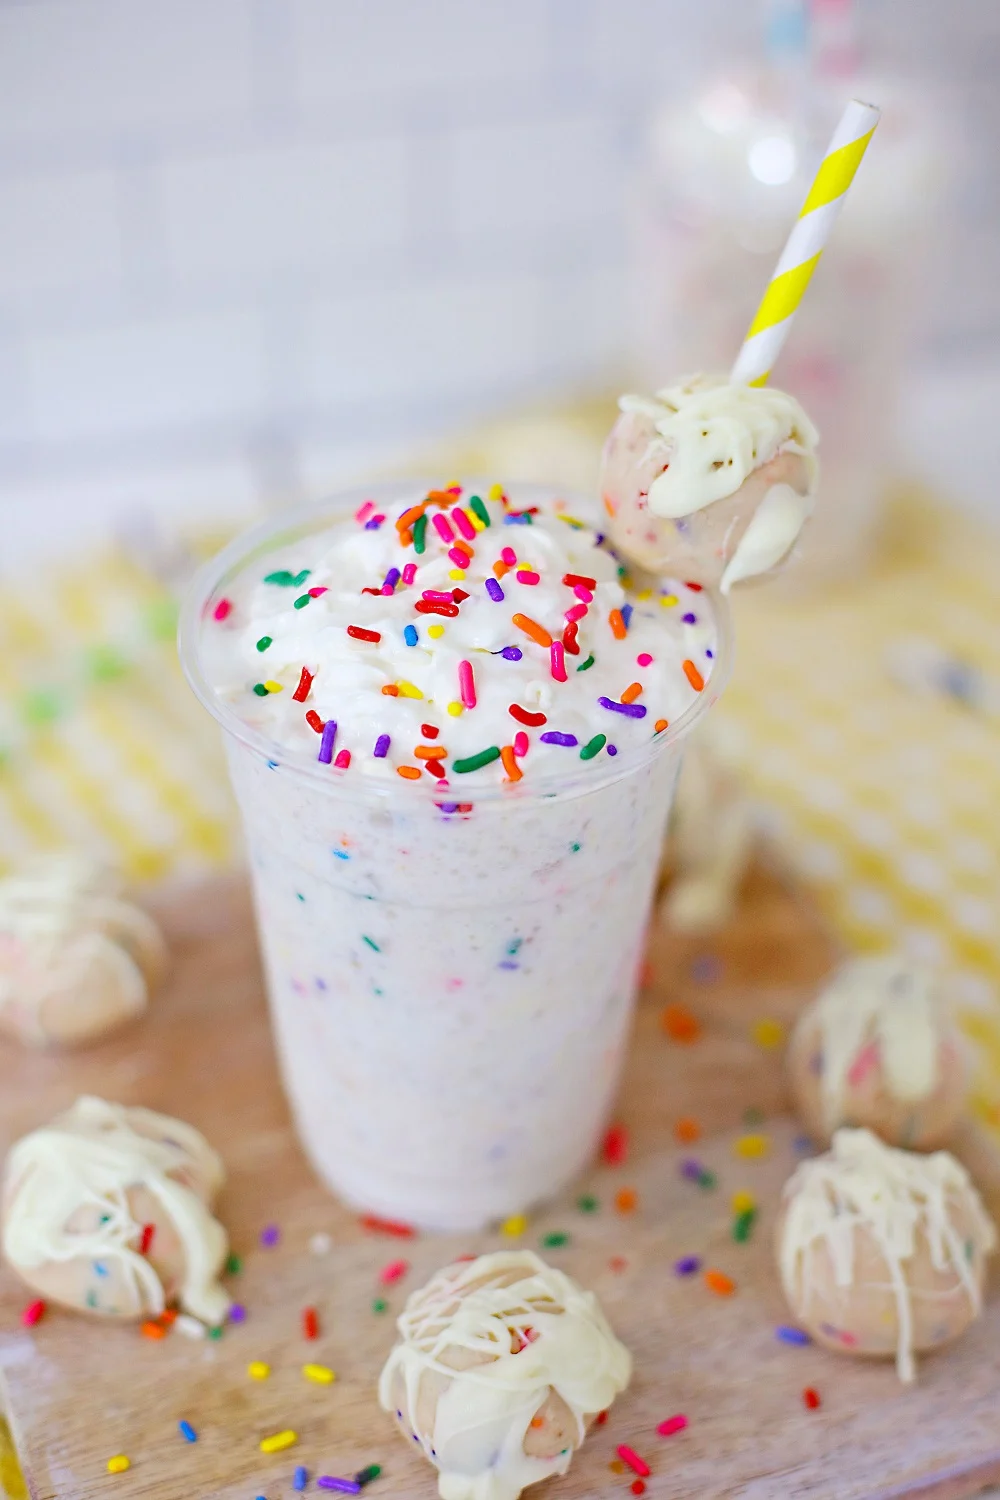 This blended iced drink will entice you with its vanilla bean flavor that's topped with whipped cream, colorful sprinkles, and birthday cake-flavored cake balls. It's an easy copycat version of Starbucks Birthday Frappuccino! via @Mooreorlesscook